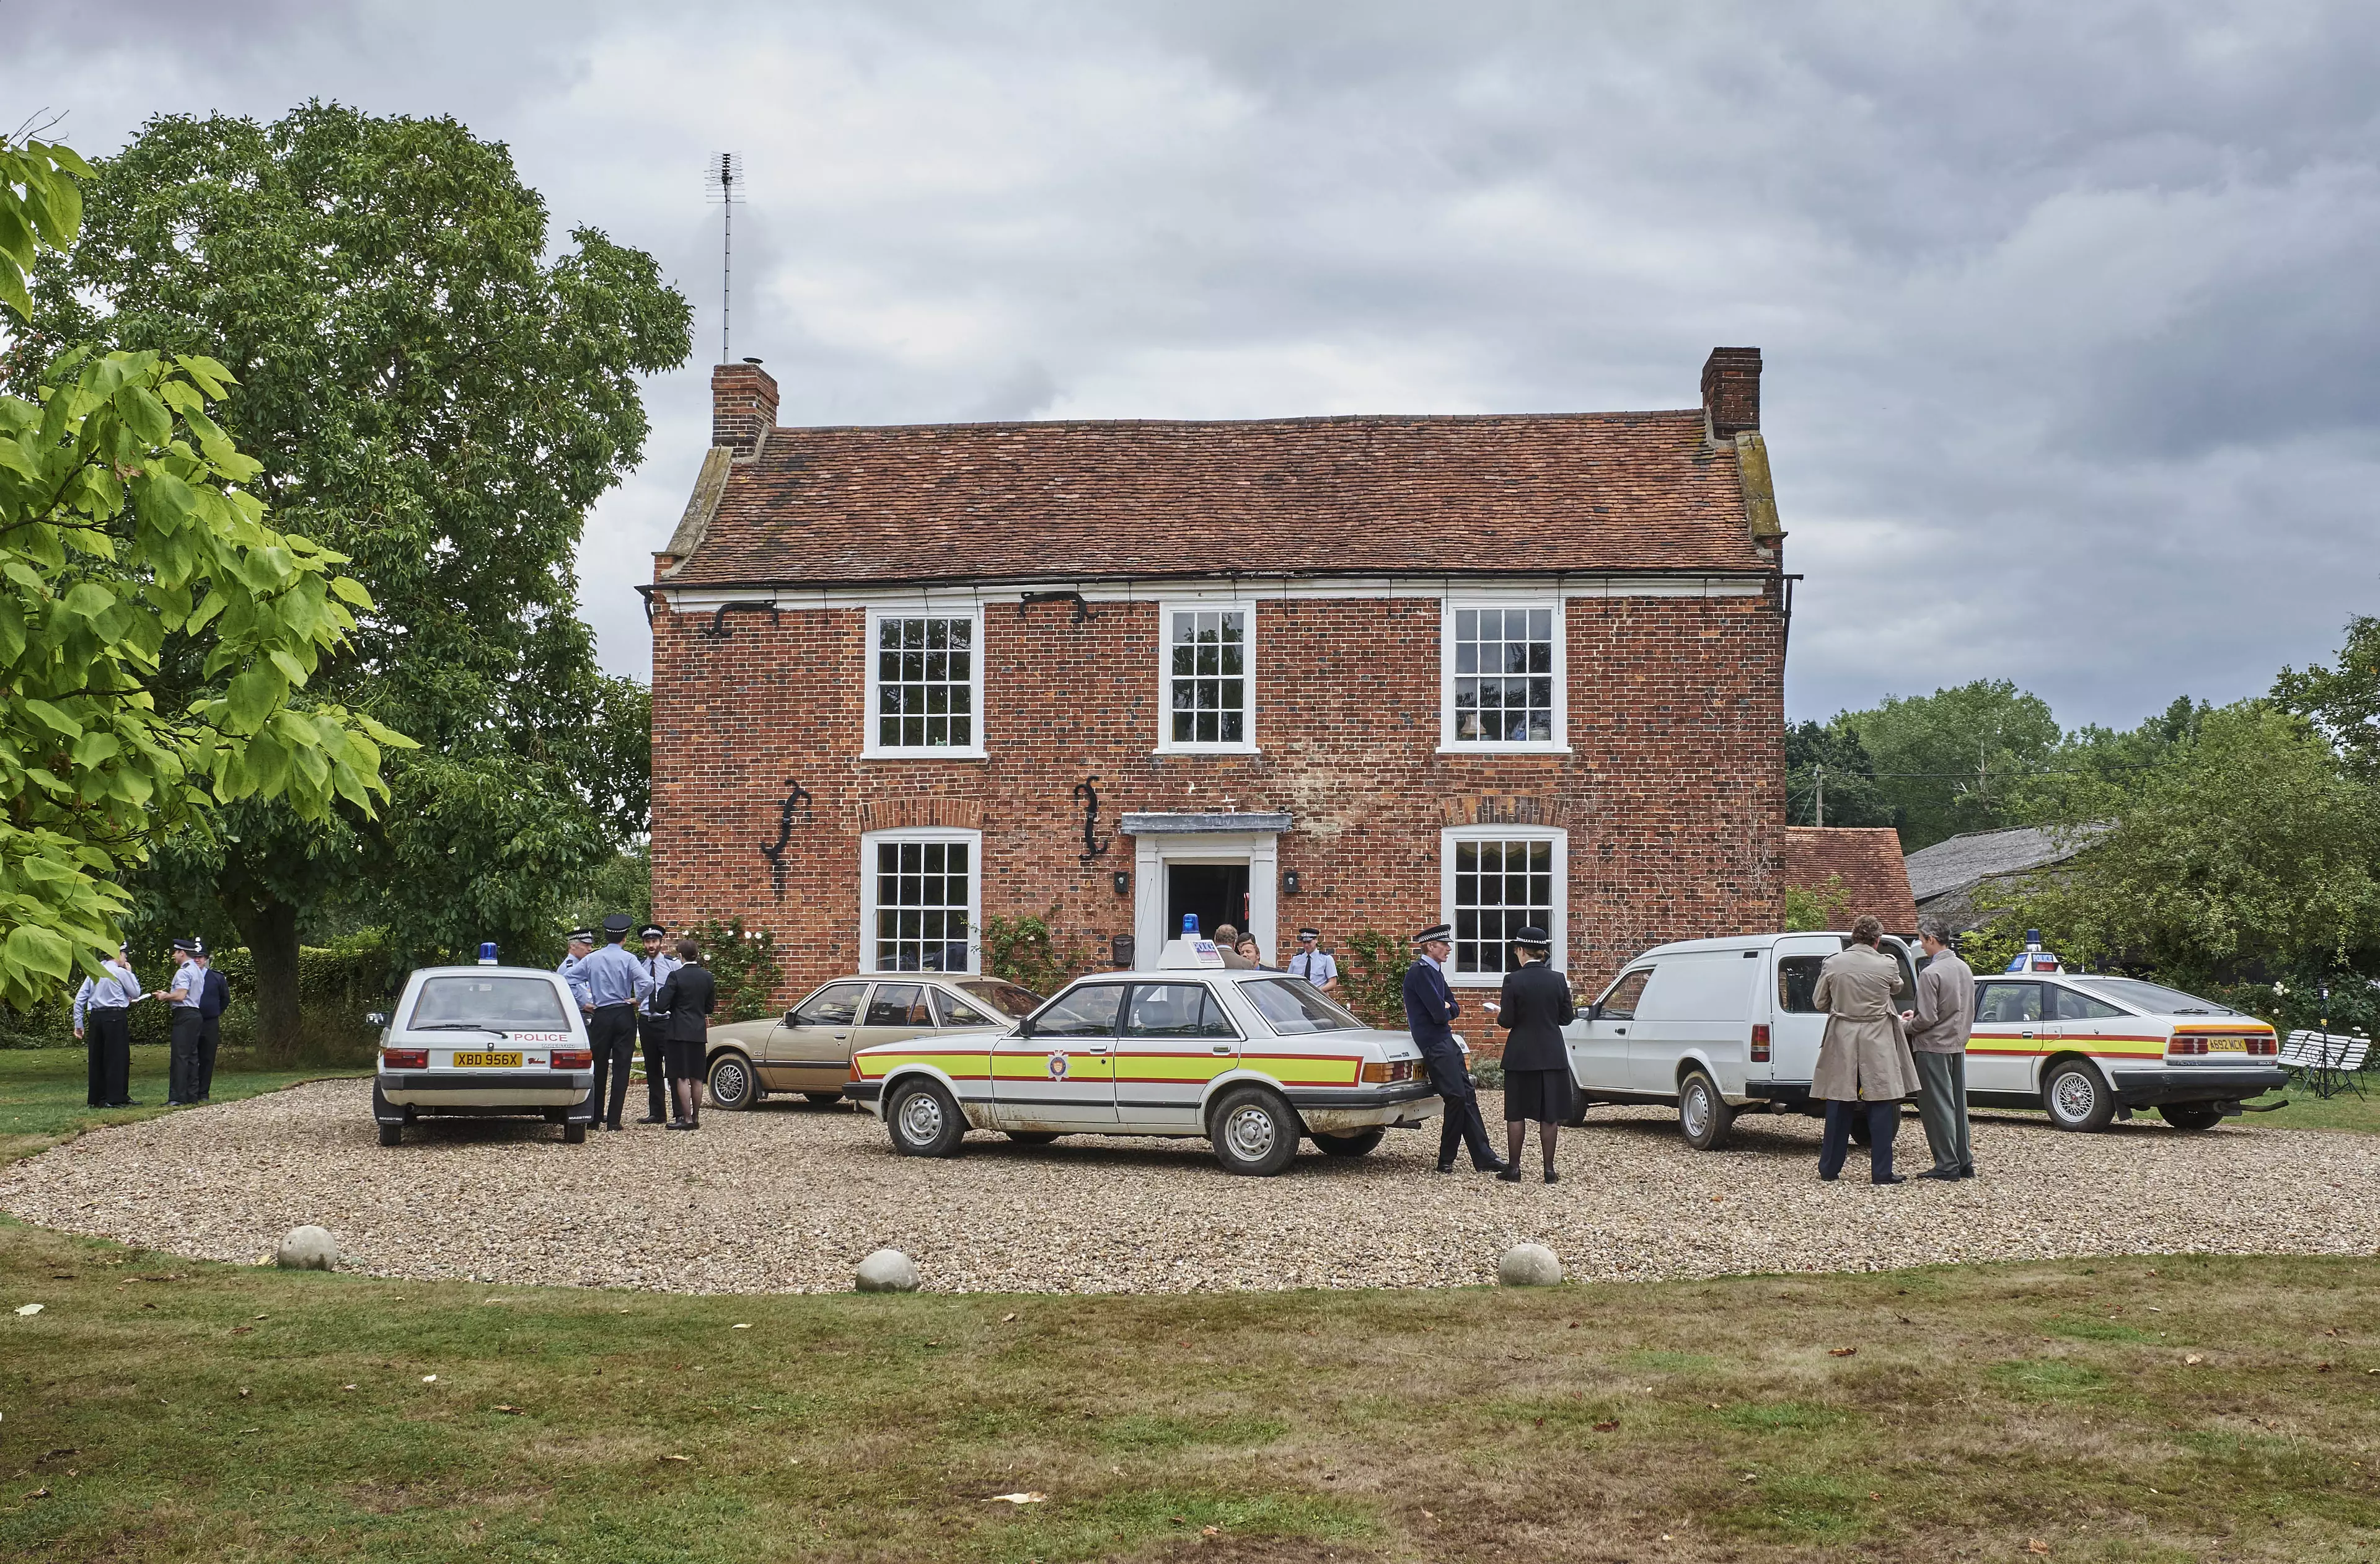 White House Farm in Essex was the location of a gruesome crime in August 1985 (